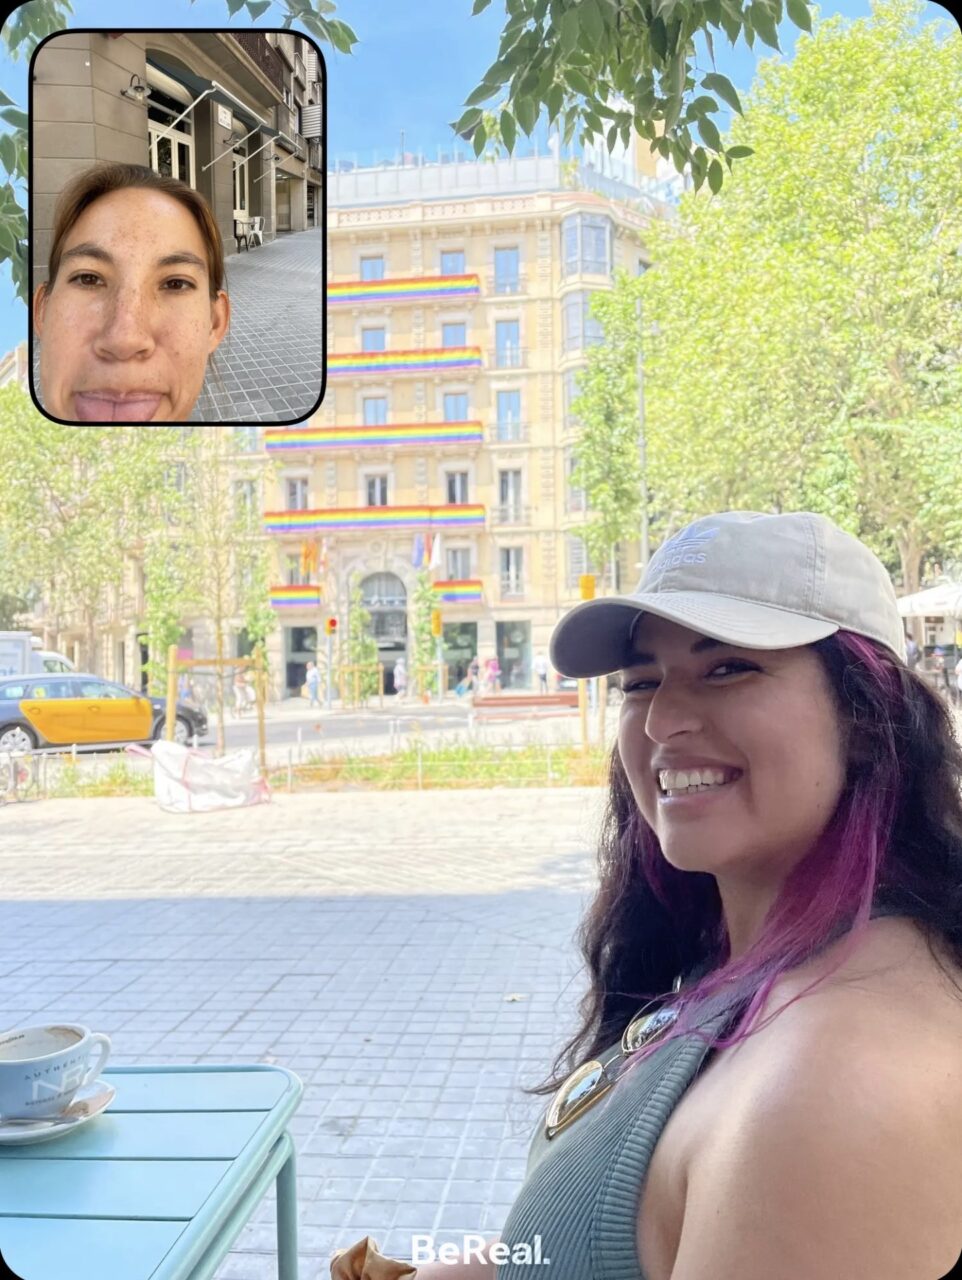 Wini and Sarah BeReal brunch while backpacking Barcelona, Spain. Building with rainbow pride flags prominently displayed in the background.